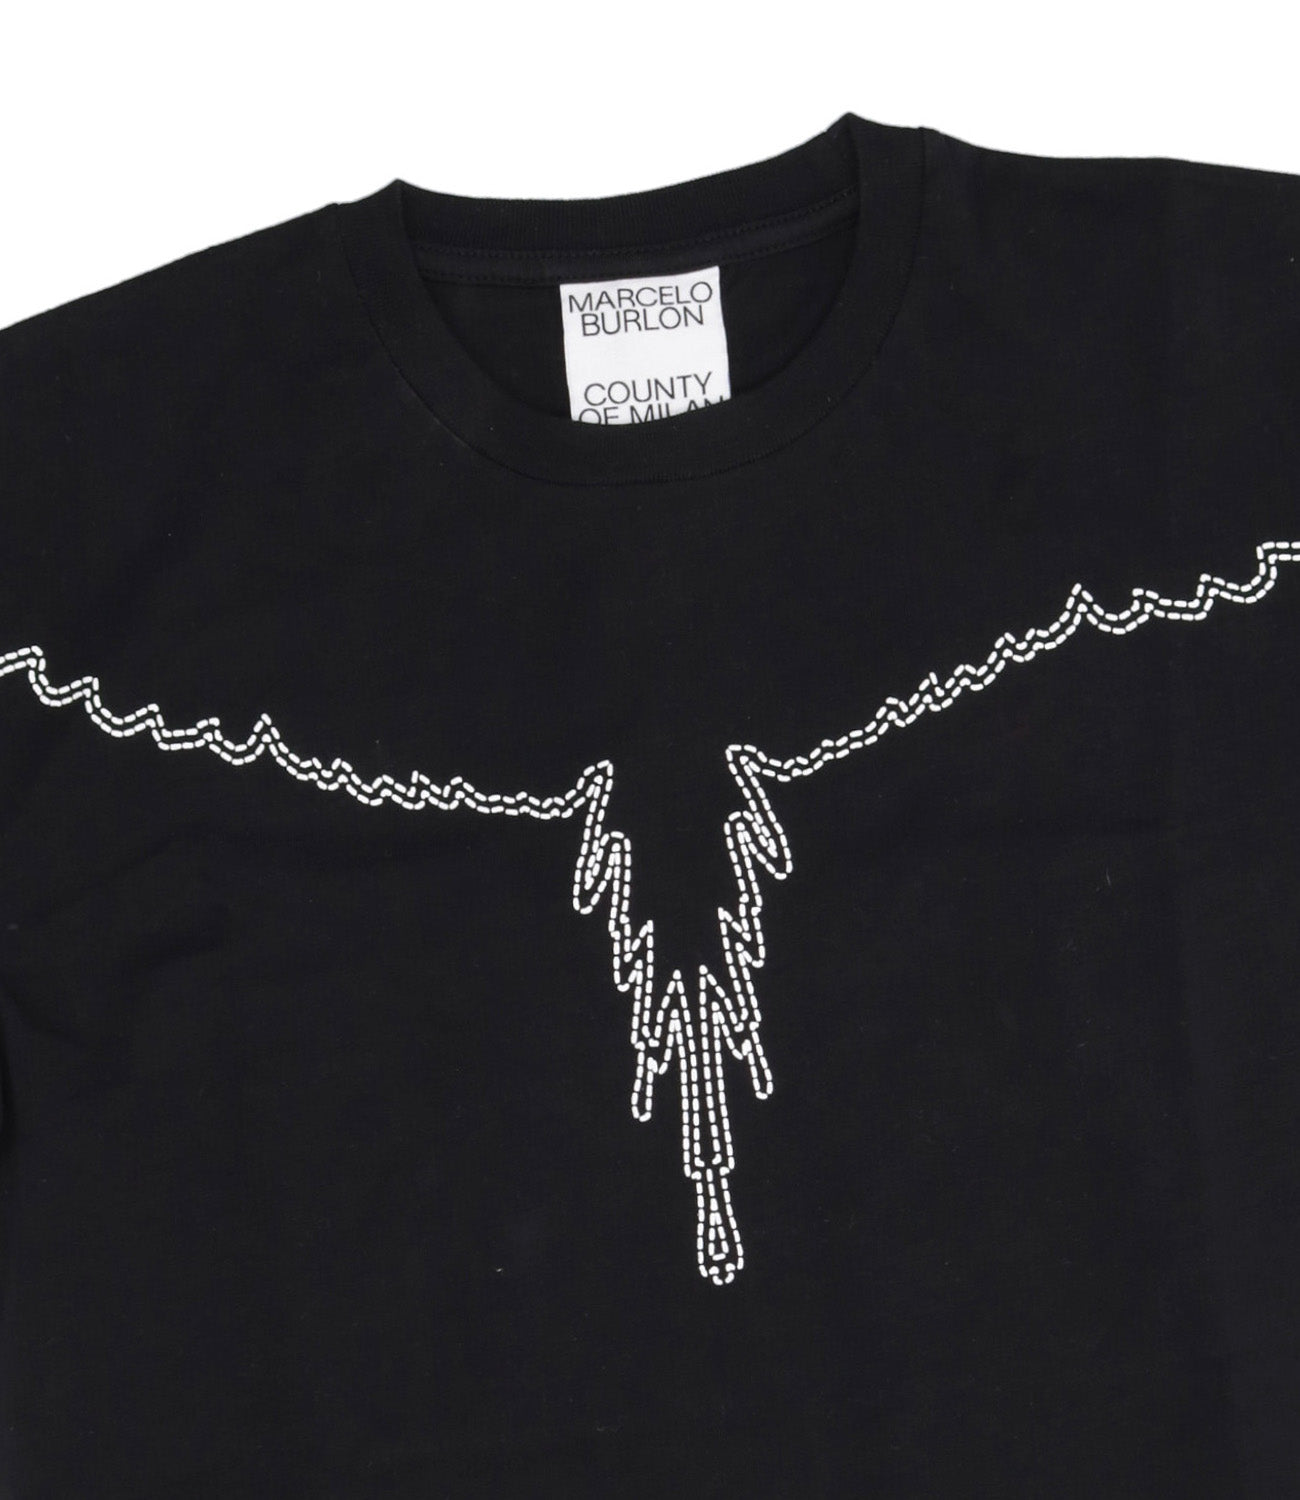 Marcelo Burlon Kids | T-Shirt Stitch Wings in Black and White